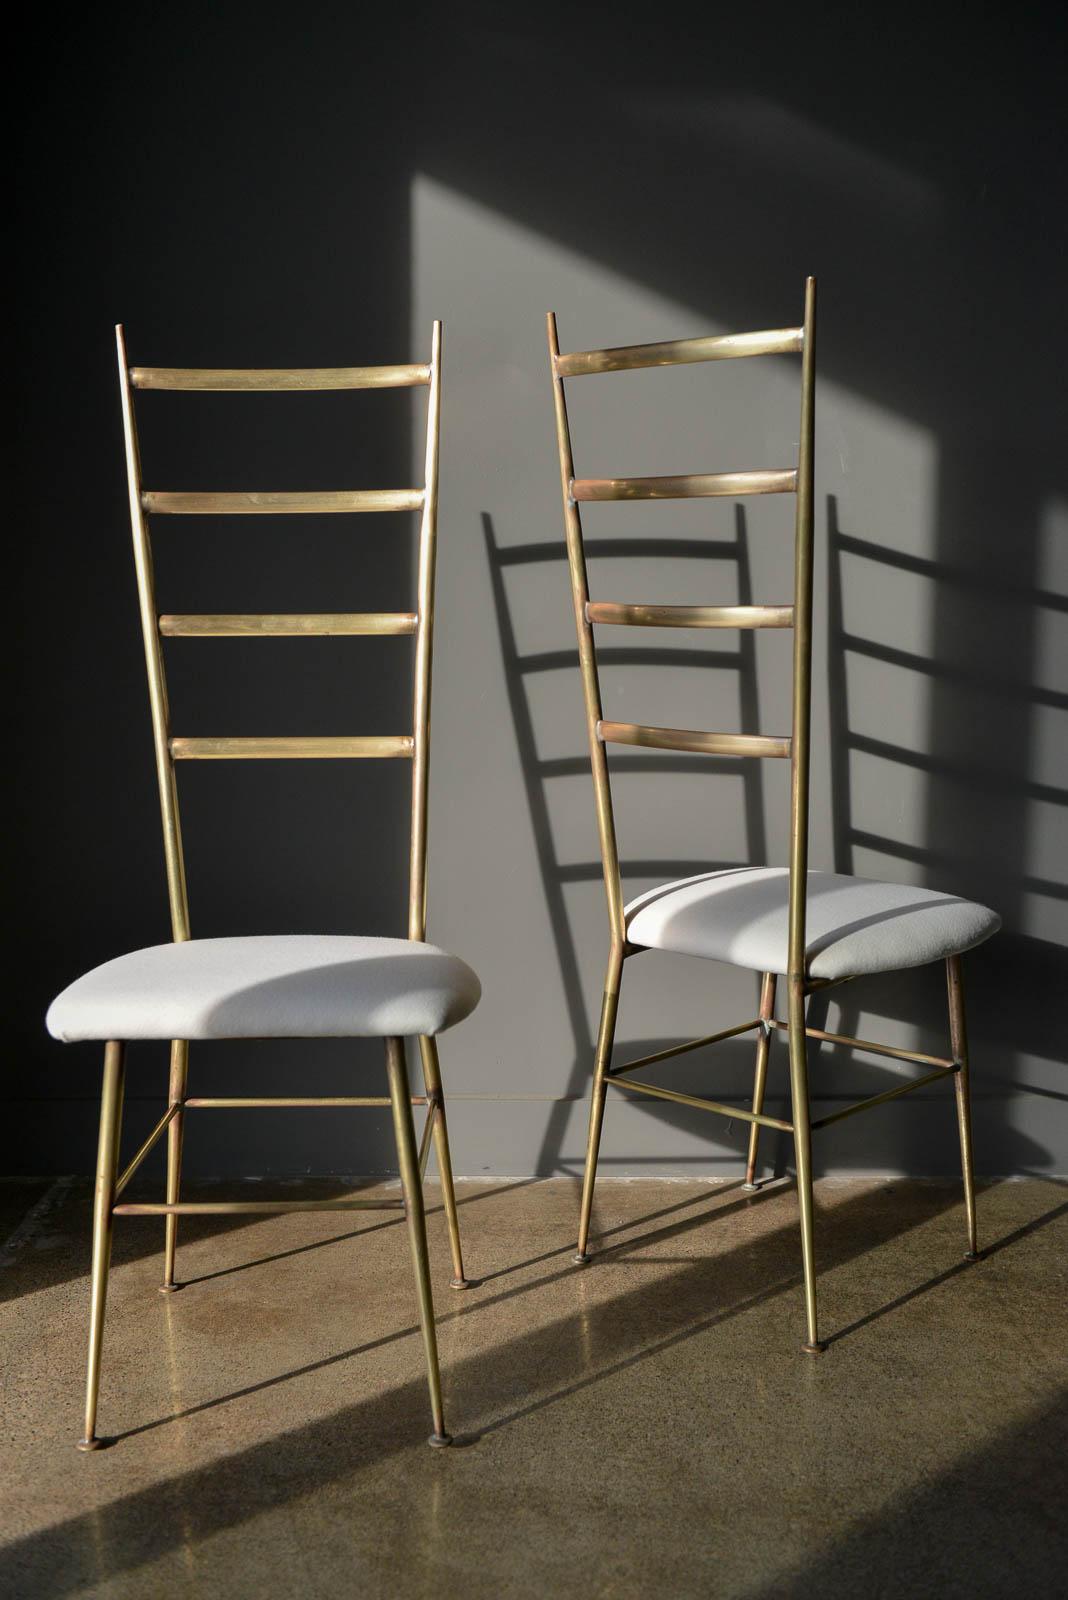 Brass Gio Ponti style Italian ladder back chairs, circa 1970. Beautiful brass frames with just the right amount of patina. New cream colored fabric seats and original feet. Great style, works wonderfully with almost any style decor.

Measure 18